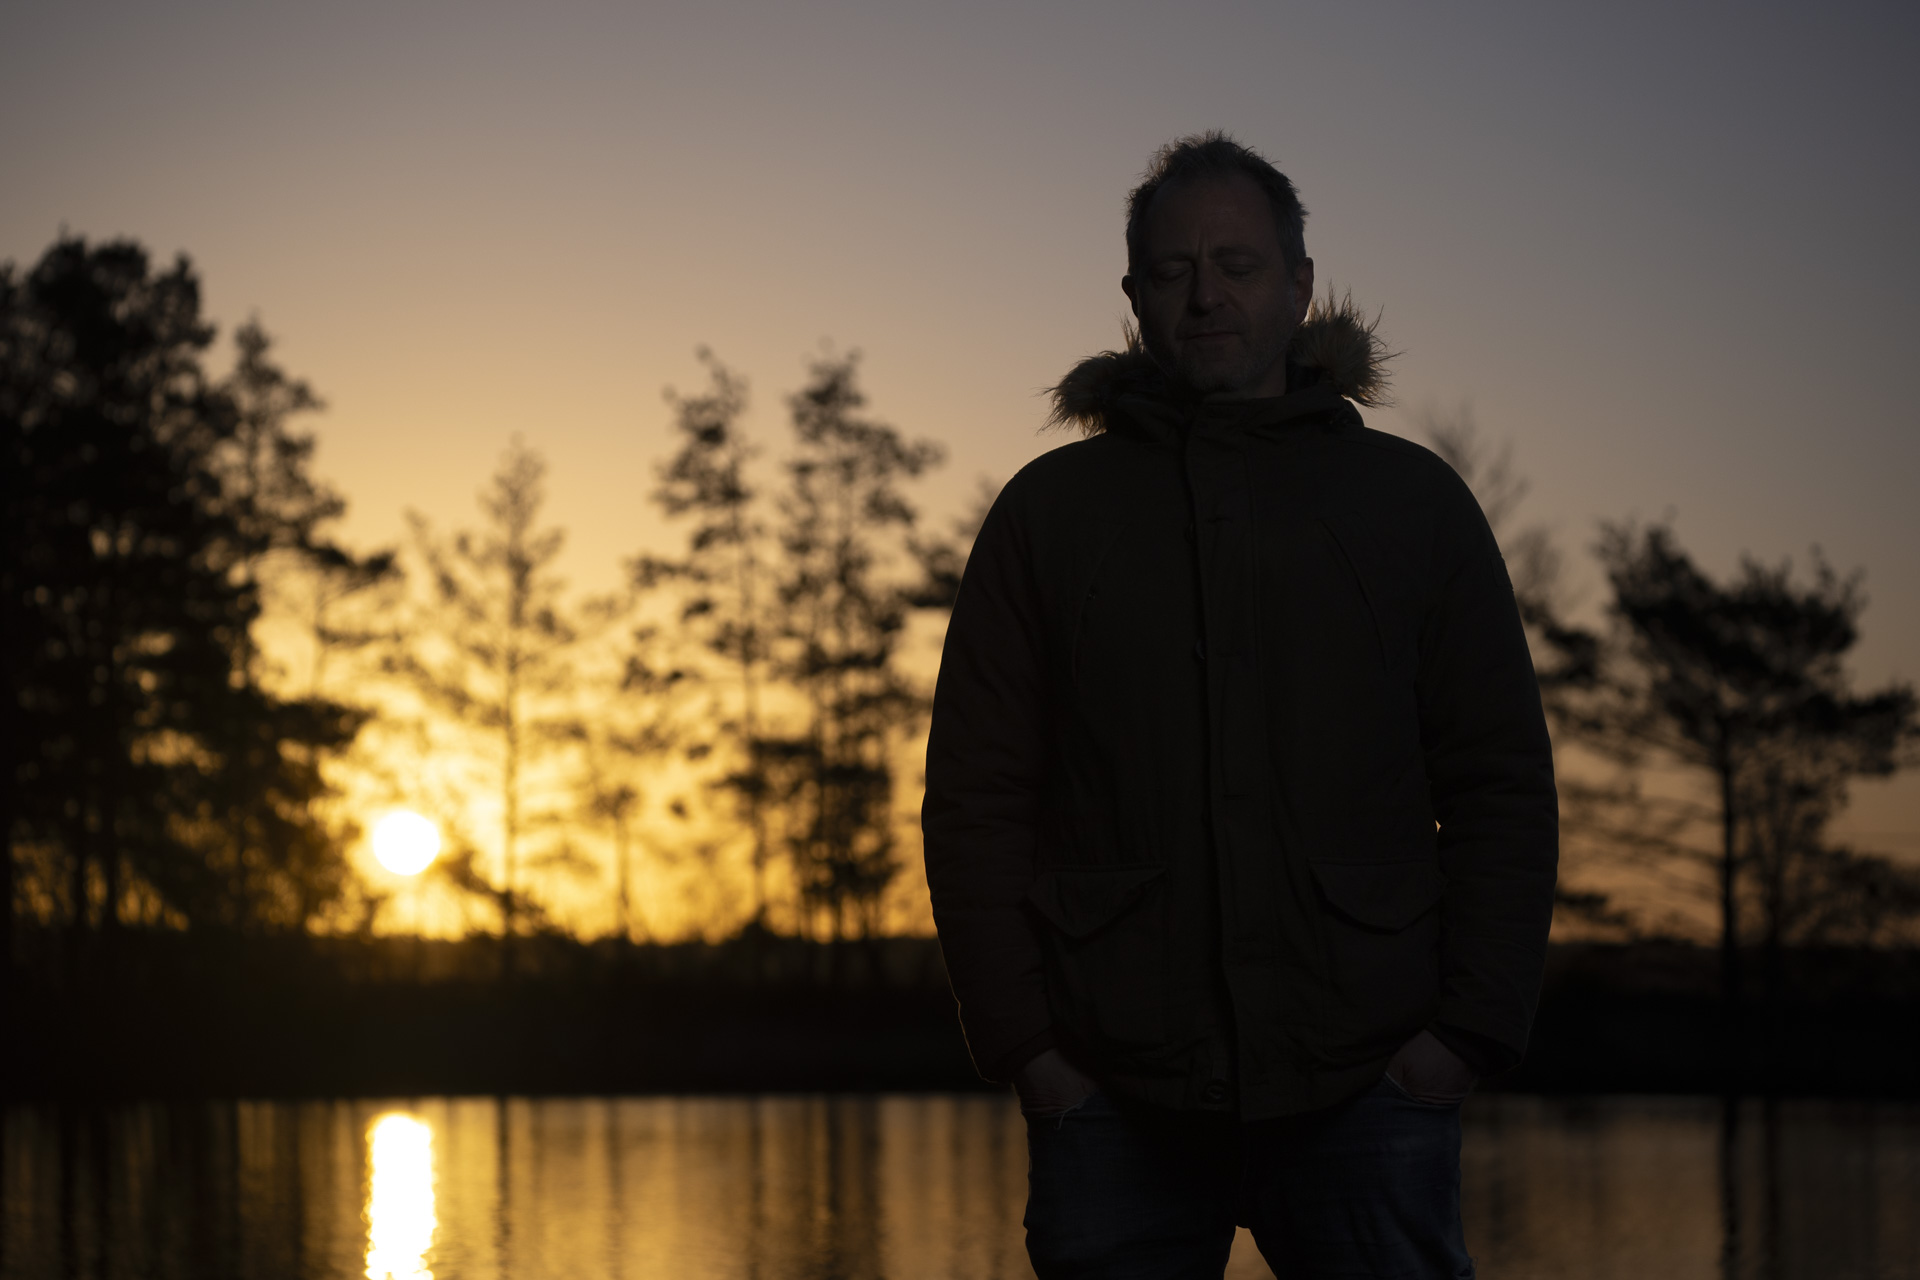 Flash photography portrait taken with the Sony A9 III at first light with golden hour background reflected in a lake